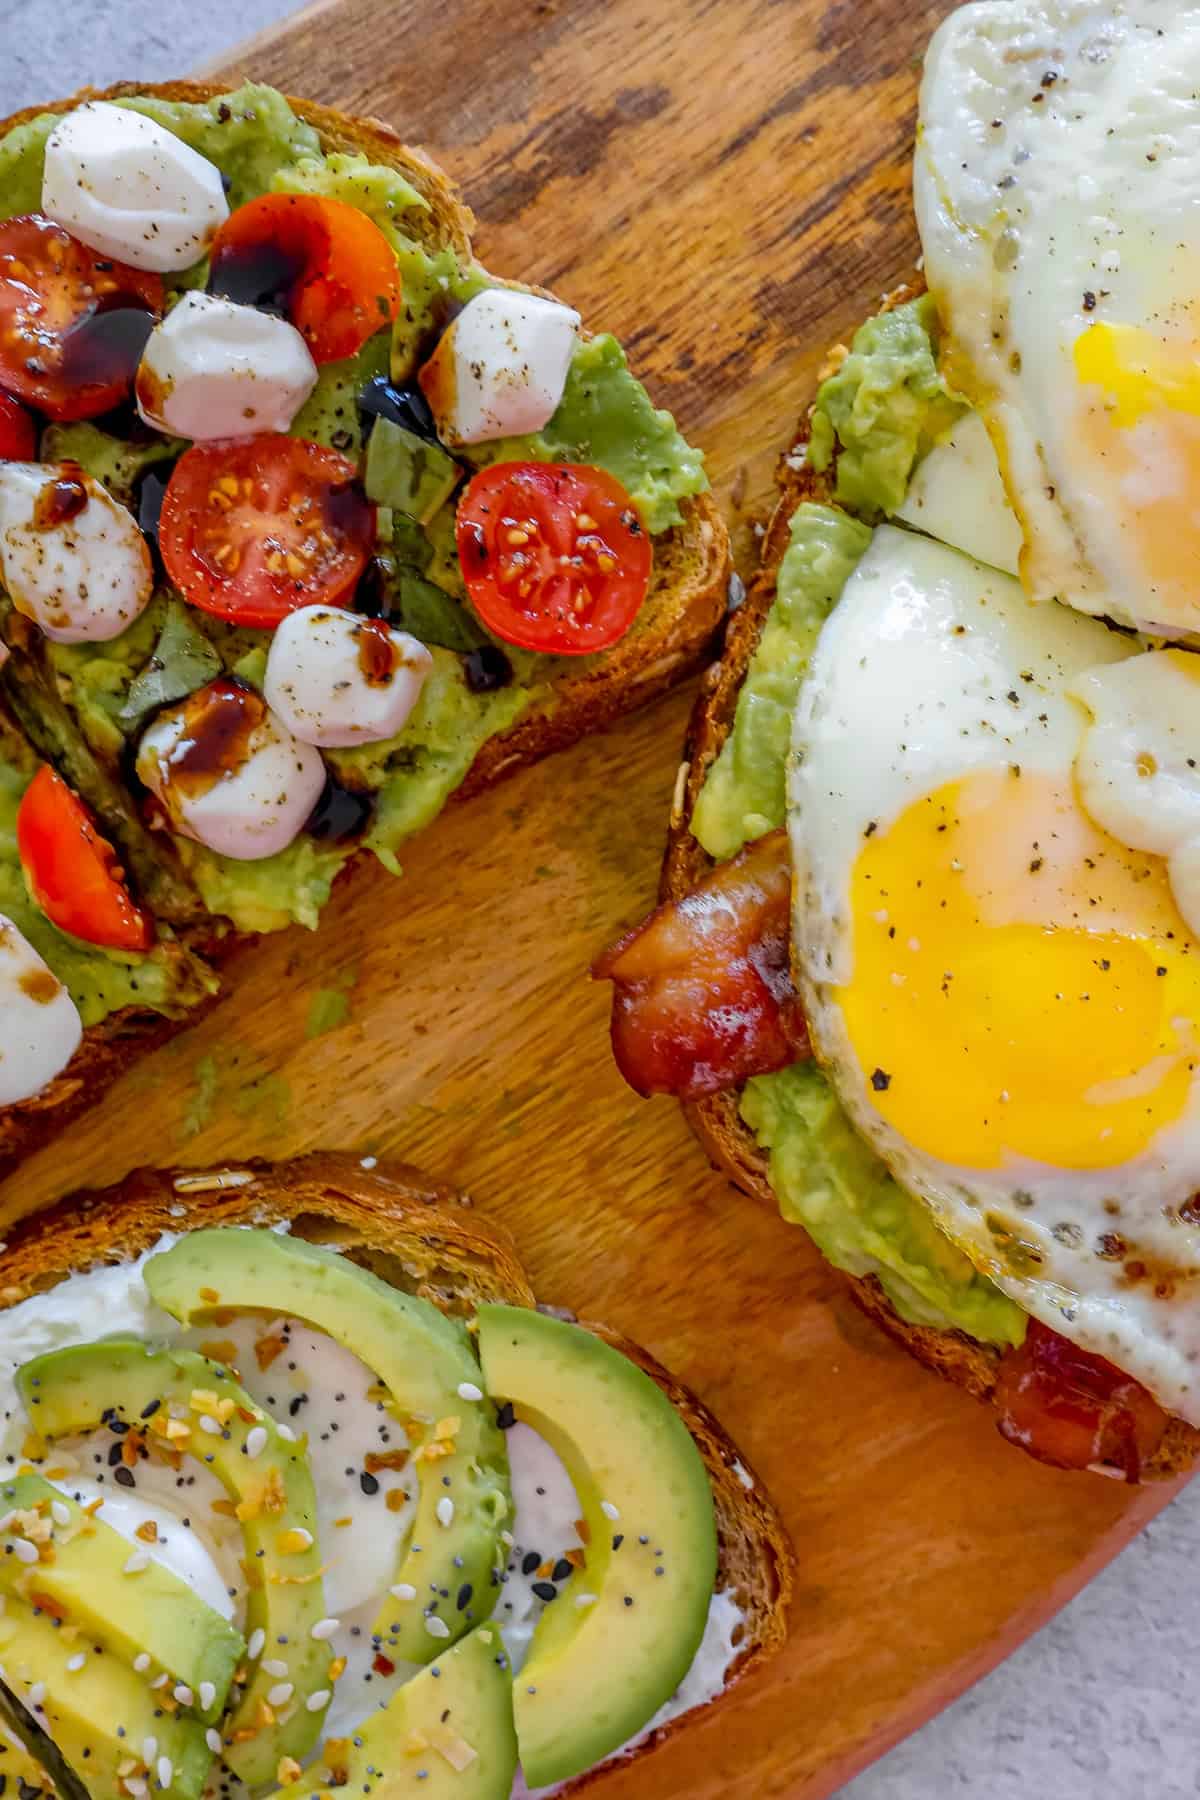 Four slices of toast with avocado, bacon, tomatoes and eggs on a wooden cutting board.